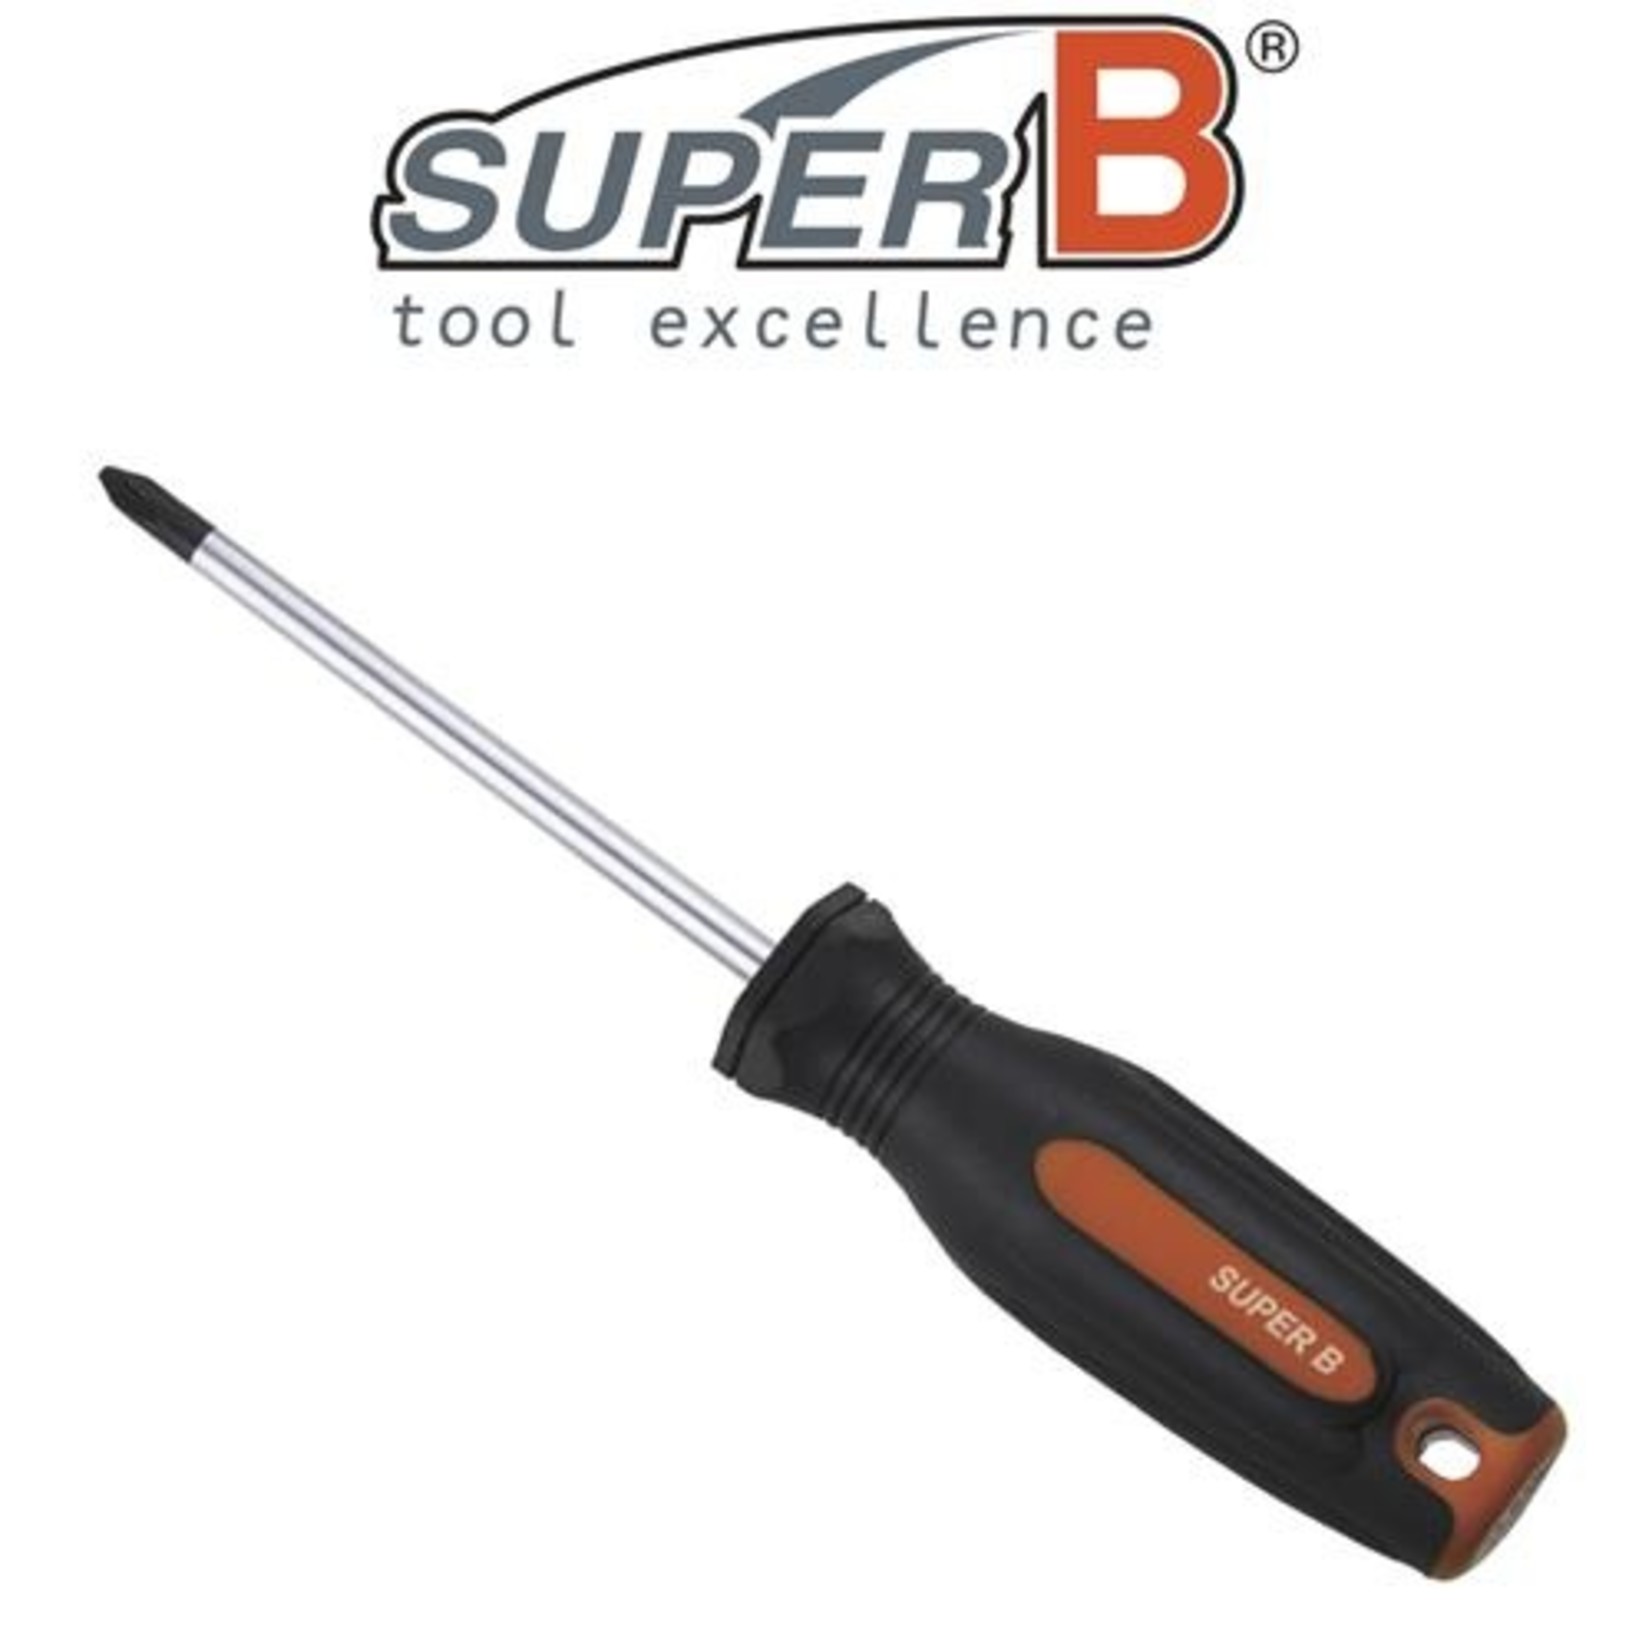 Bikecorp (The Bicycle Corporation Pty. Ltd. SuperB Screwdriver - Phillips 2 - 100mm - Made of High Grade Steel - Bike Tool